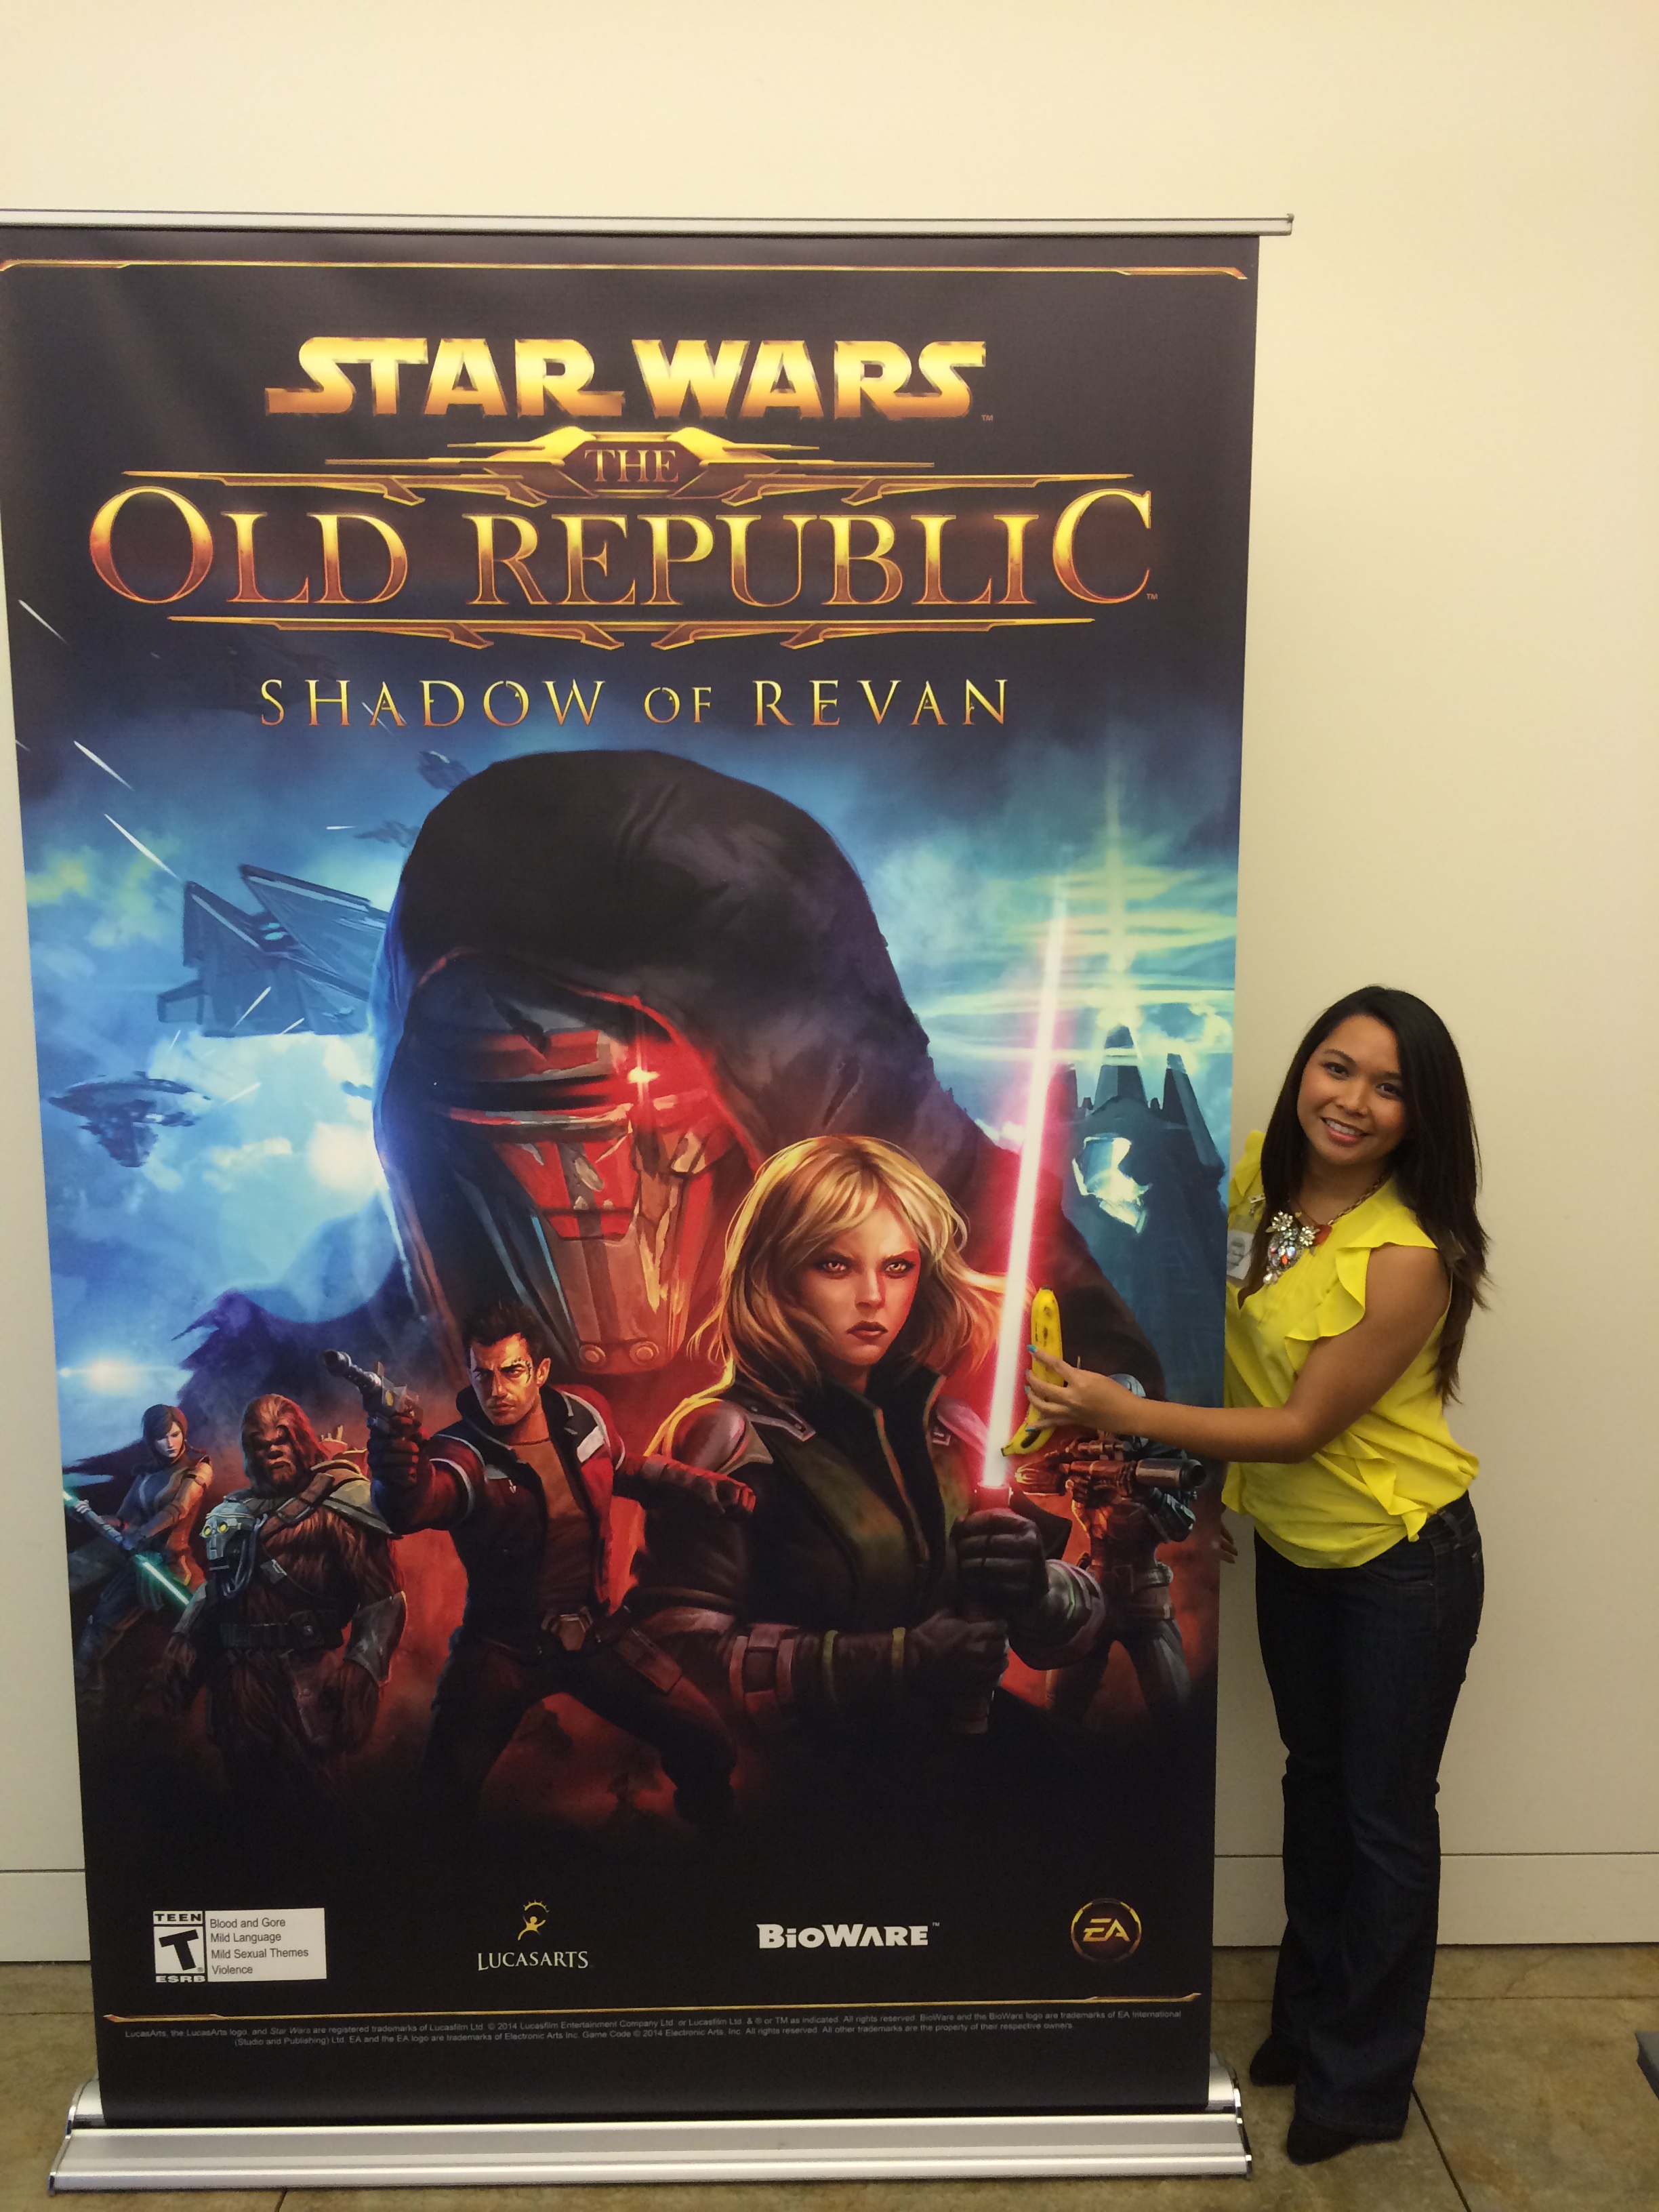 We took a few pictures next to the large Shadow of Revan poster and I